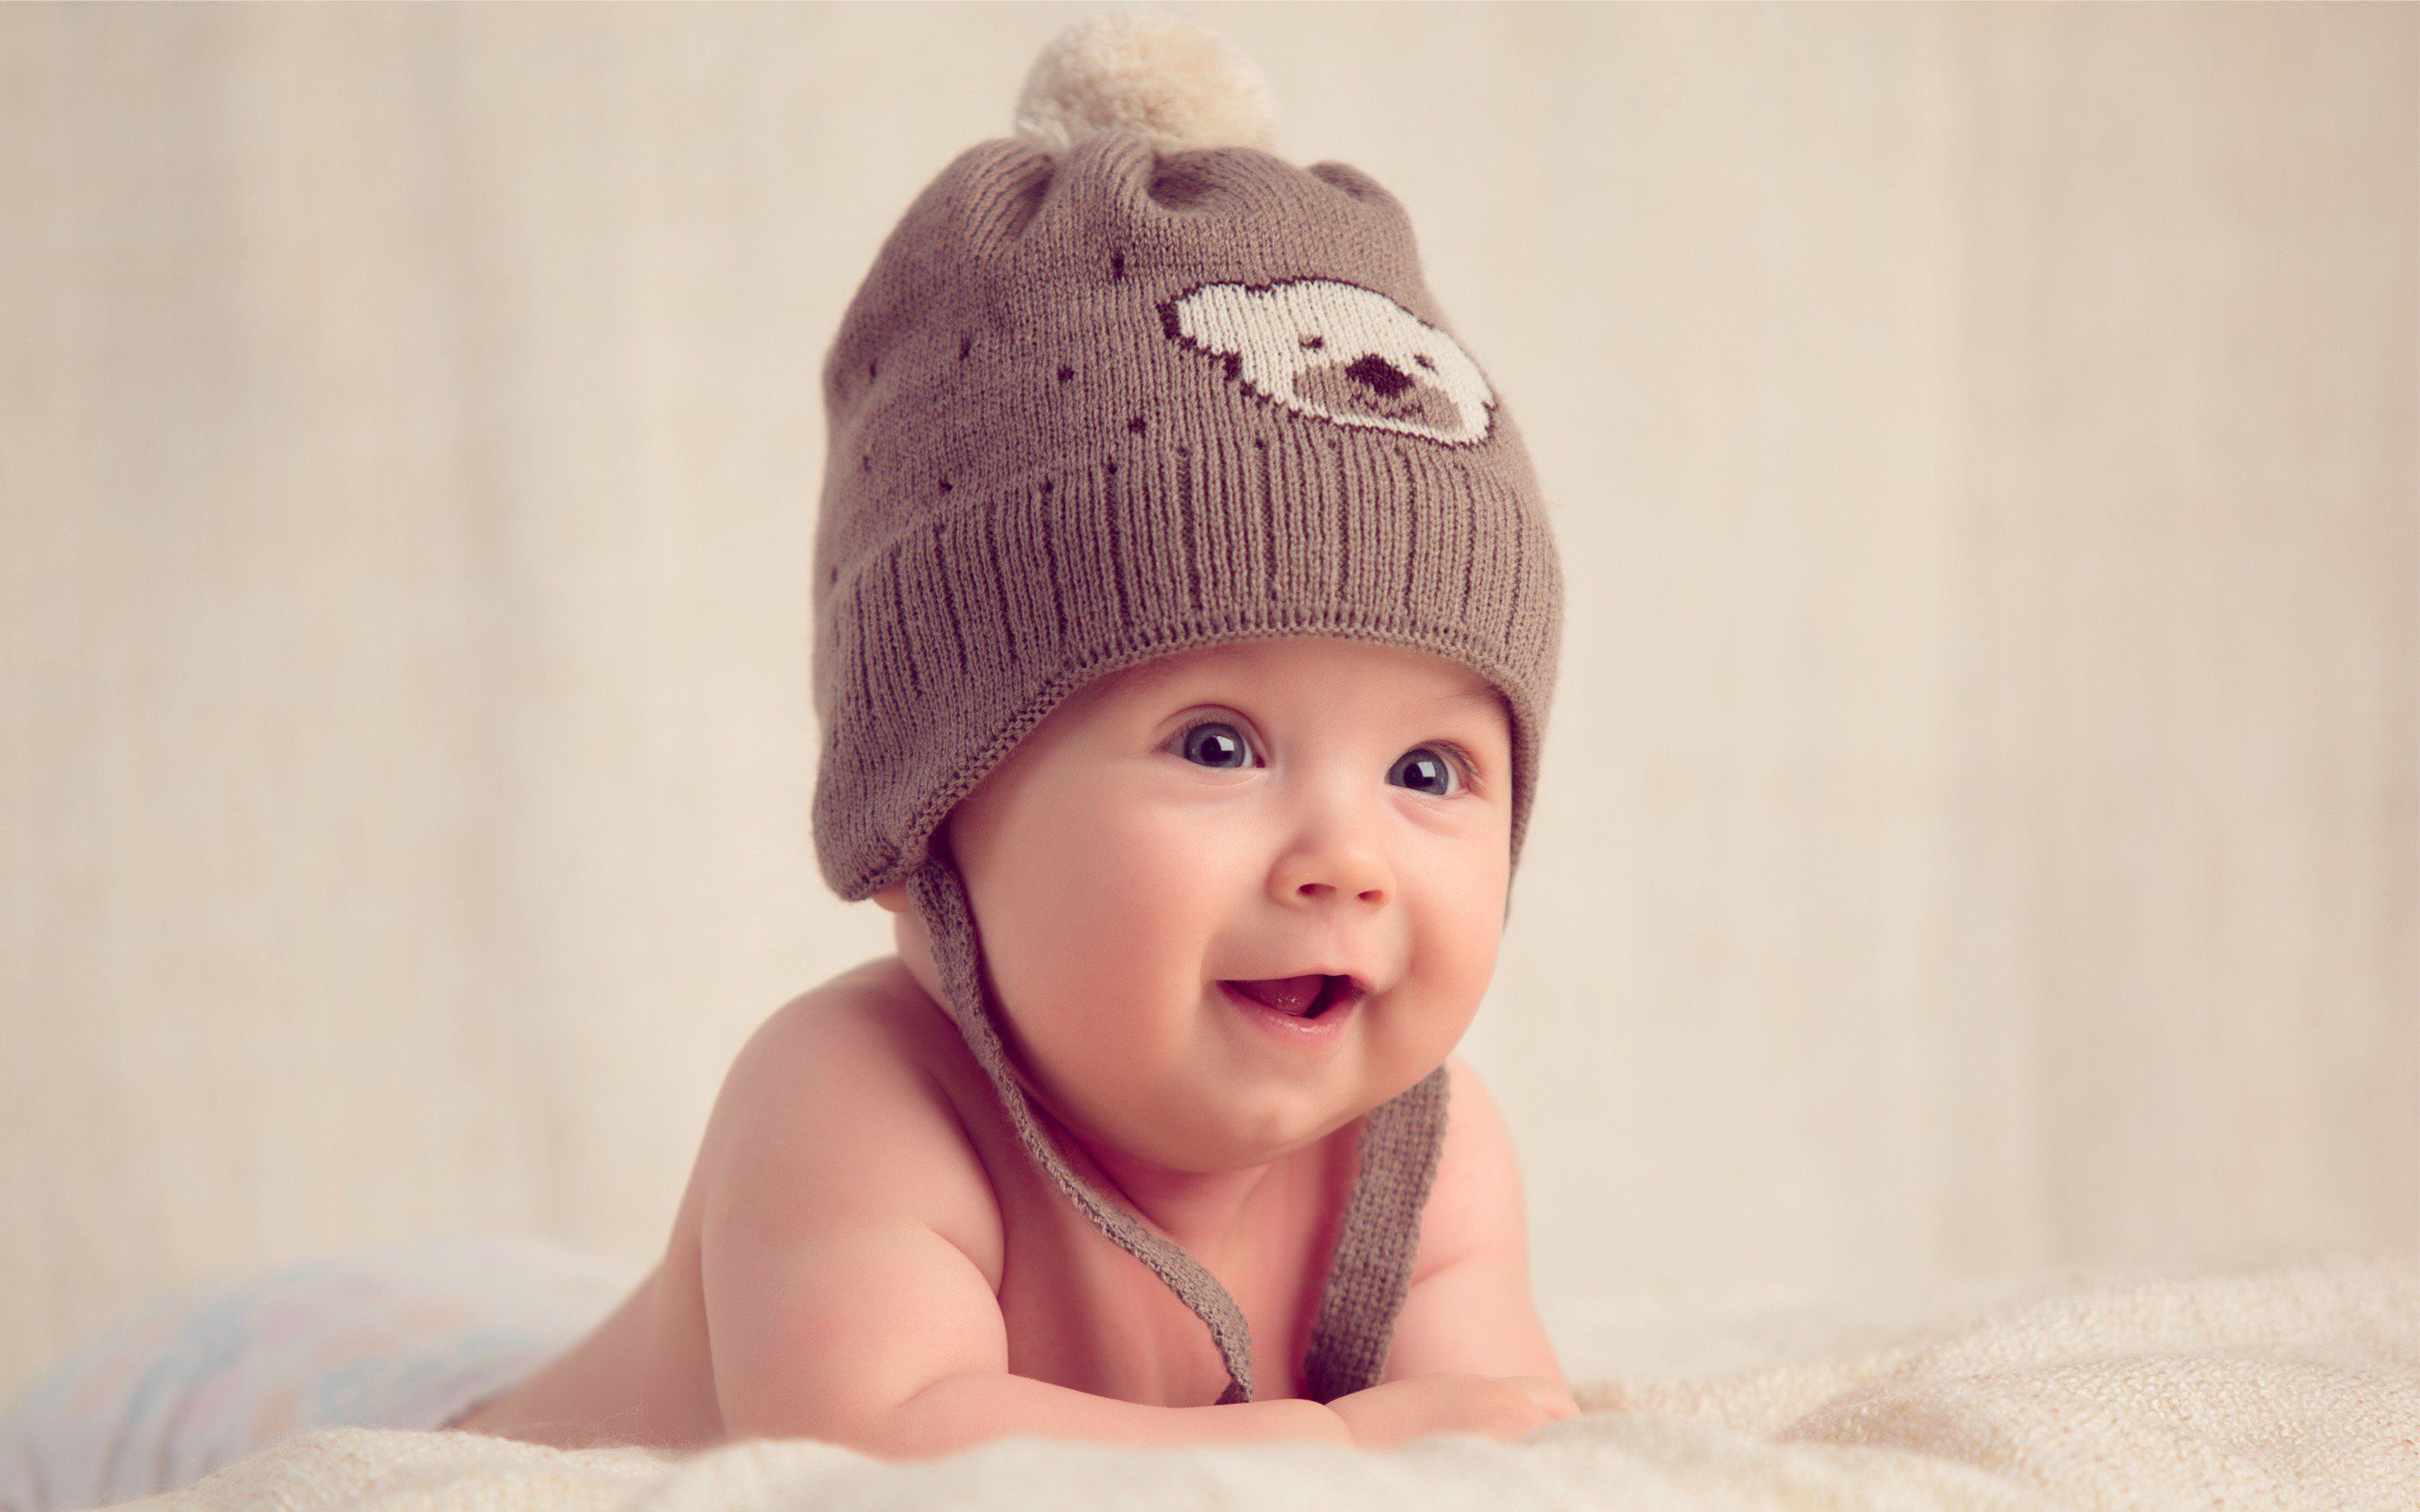 Smiling Baby 1366x768 Resolution HD 4k Wallpaper, Image, Background, Photo and Picture